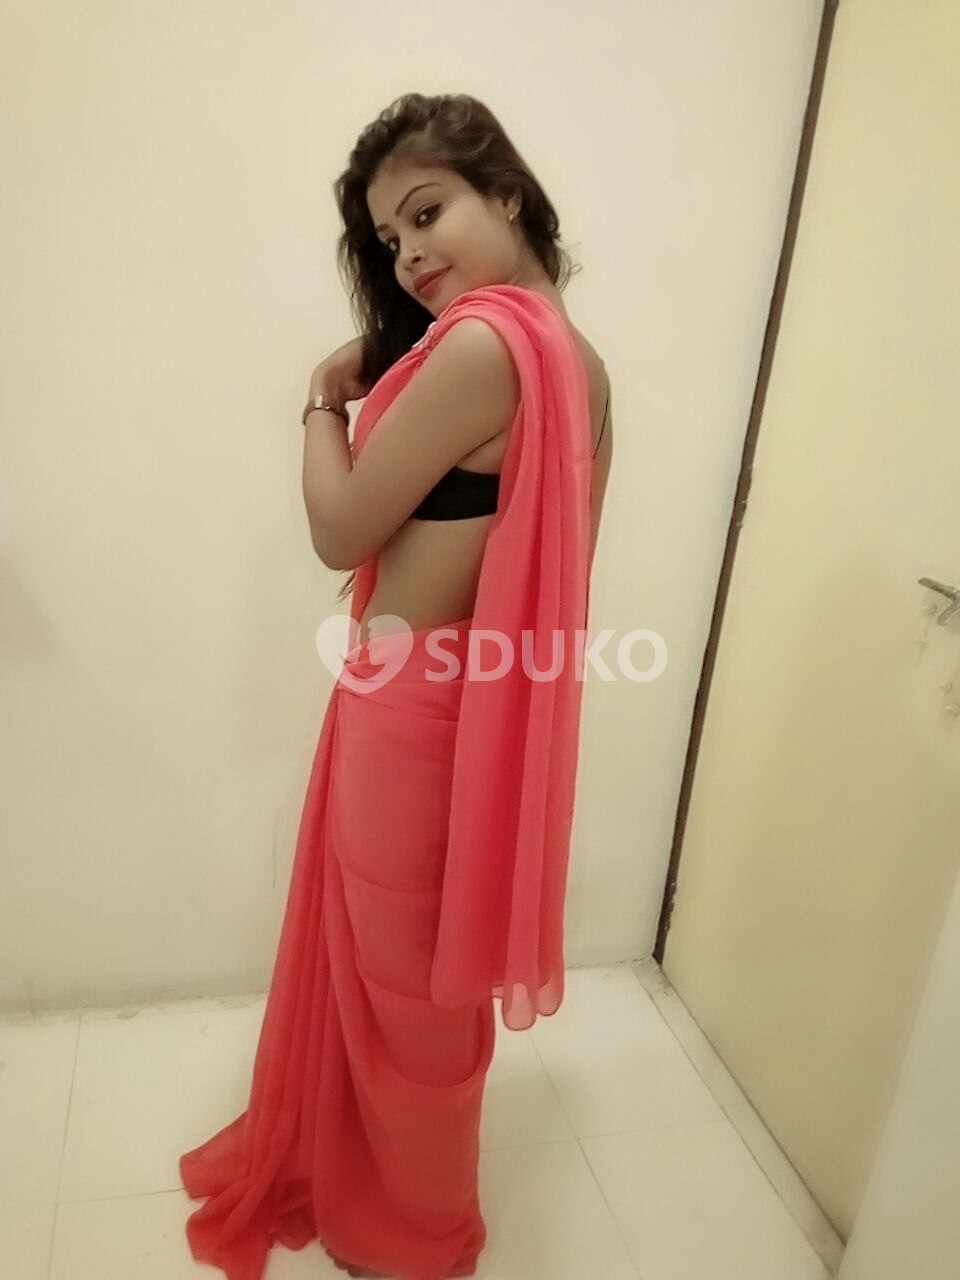 YASHWANTPUR DIRECT LOW PRICE 24X7 AVAILABLE HOT COLLEGE GIRL HOUSEWIFE AUNTIES  ( HOTEL & HOME SERVICE 100% SATISFACTION